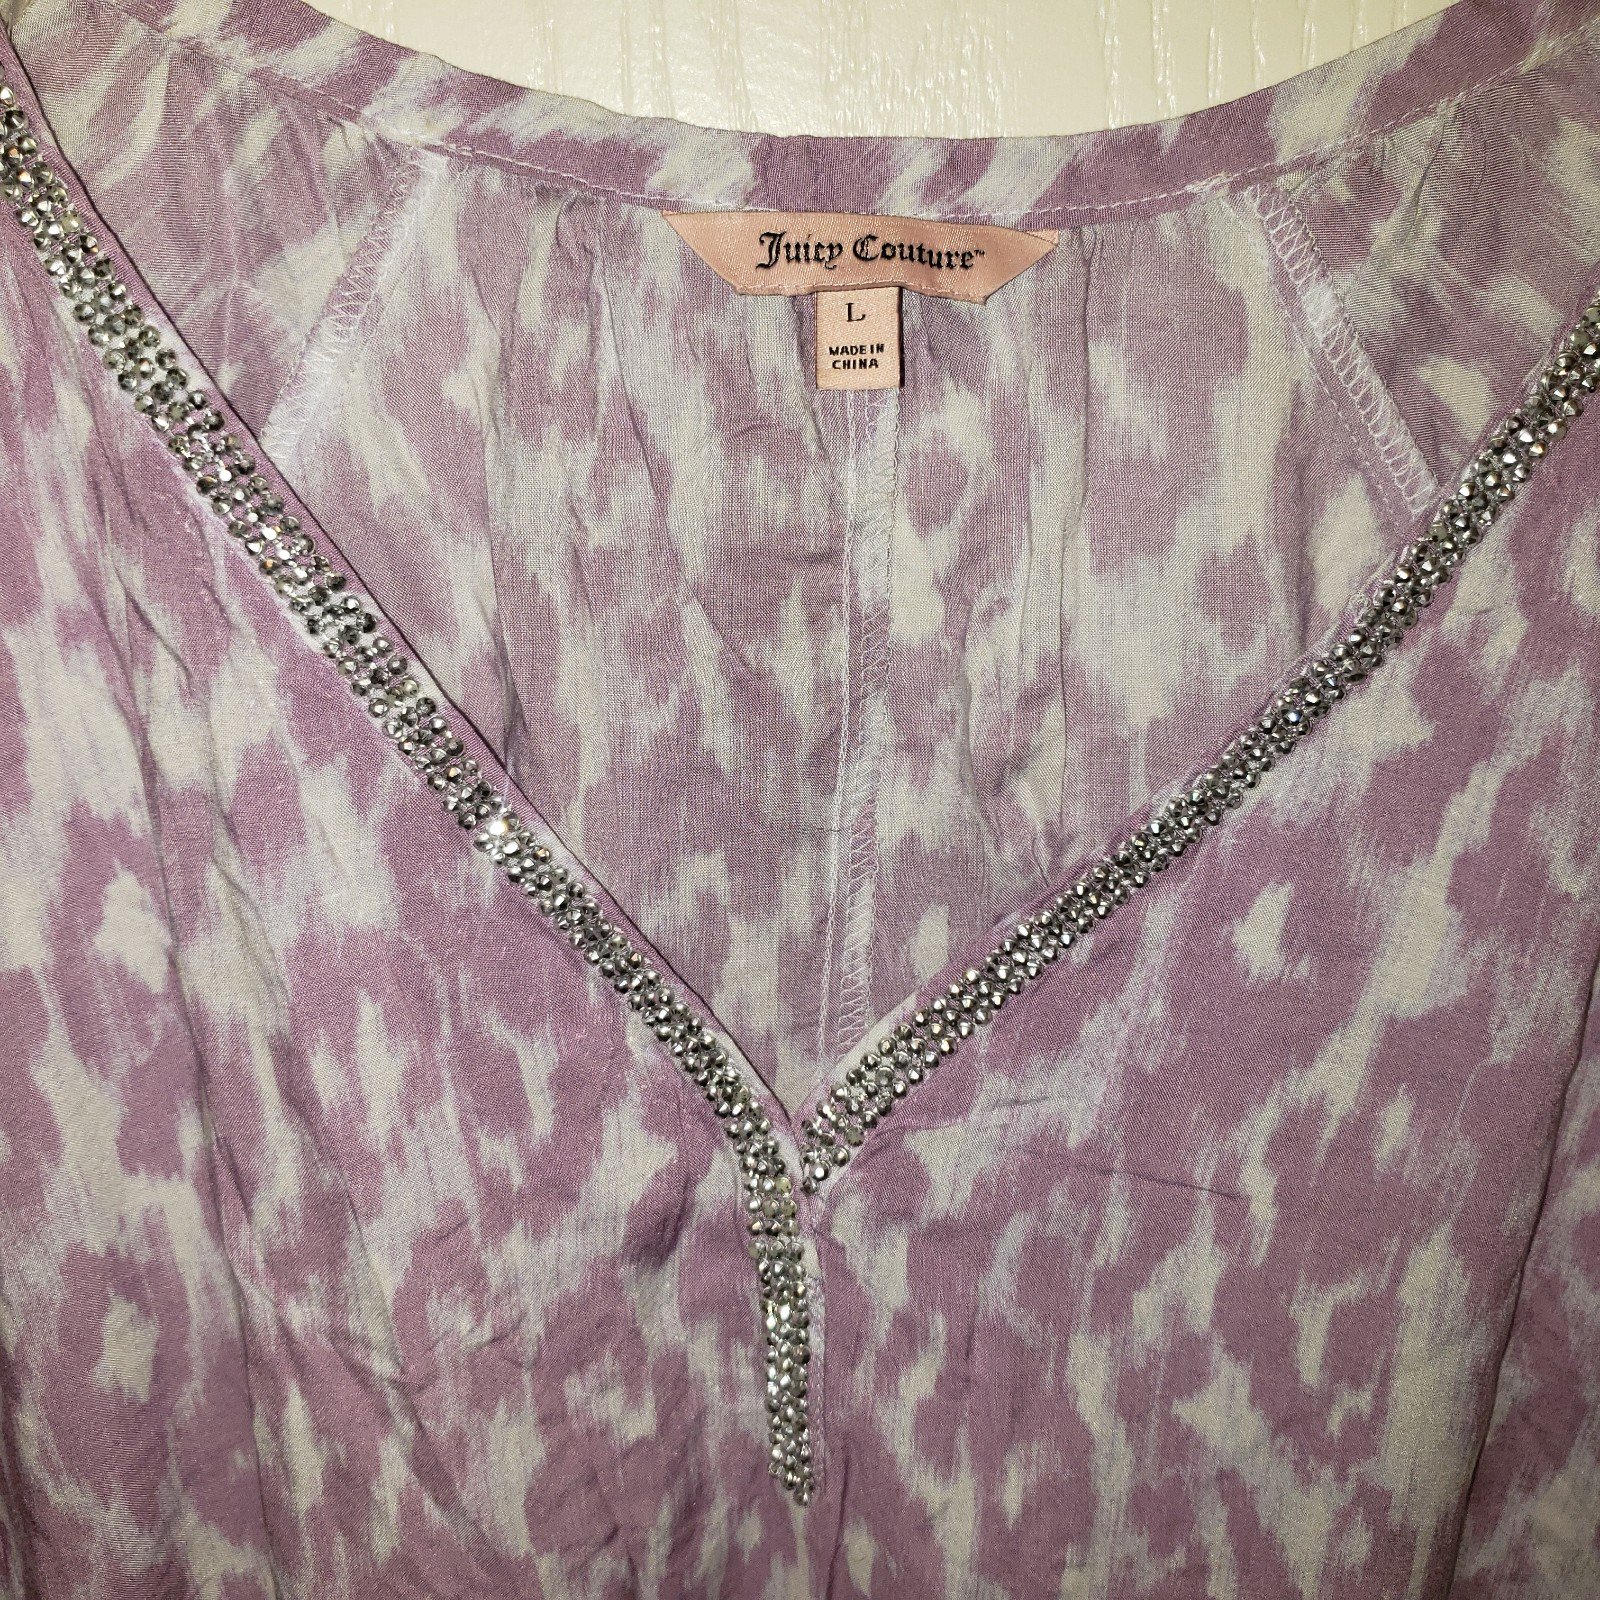 Personality Size Large JUICY COUTURE Lilac Animal Print Blouse Top ILNNhqm2B Online Exclusive